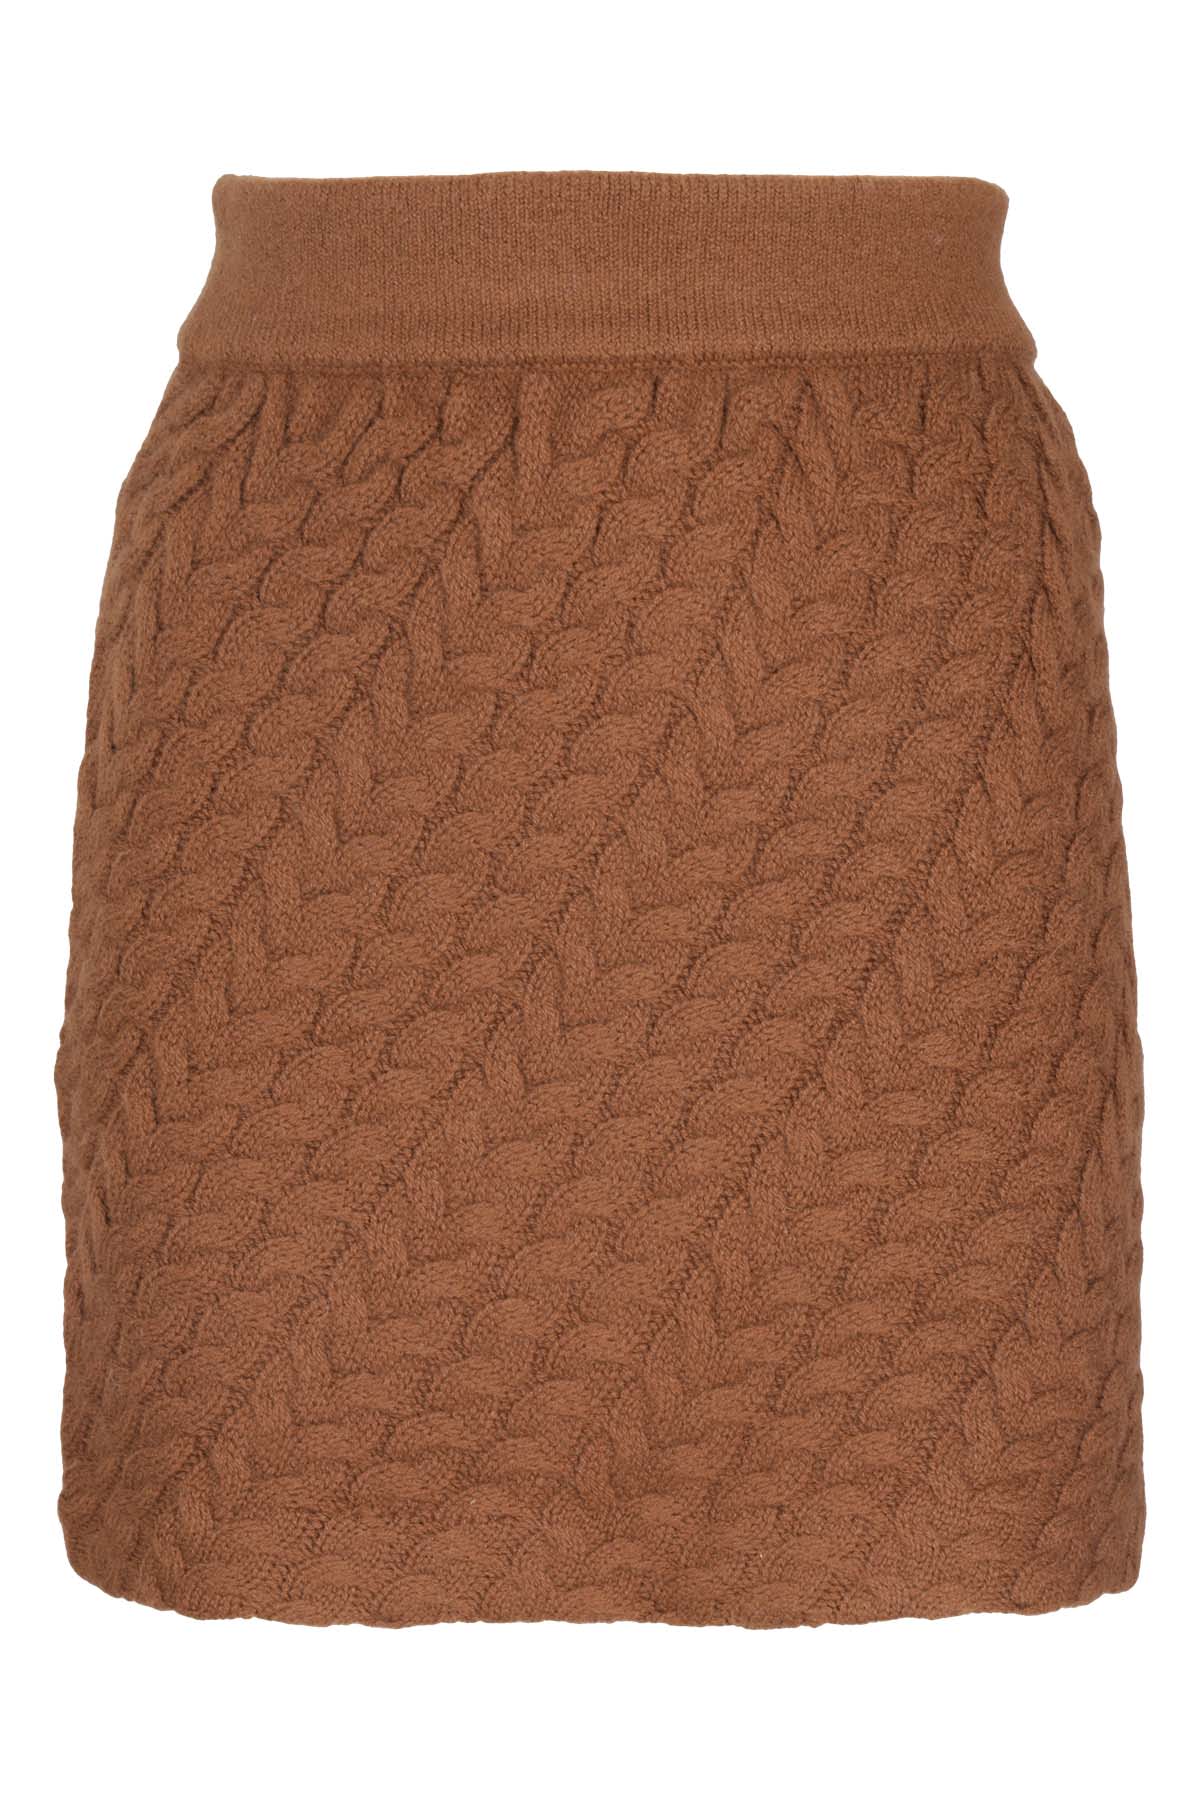 Loulou Studio Cable Knit Skirt